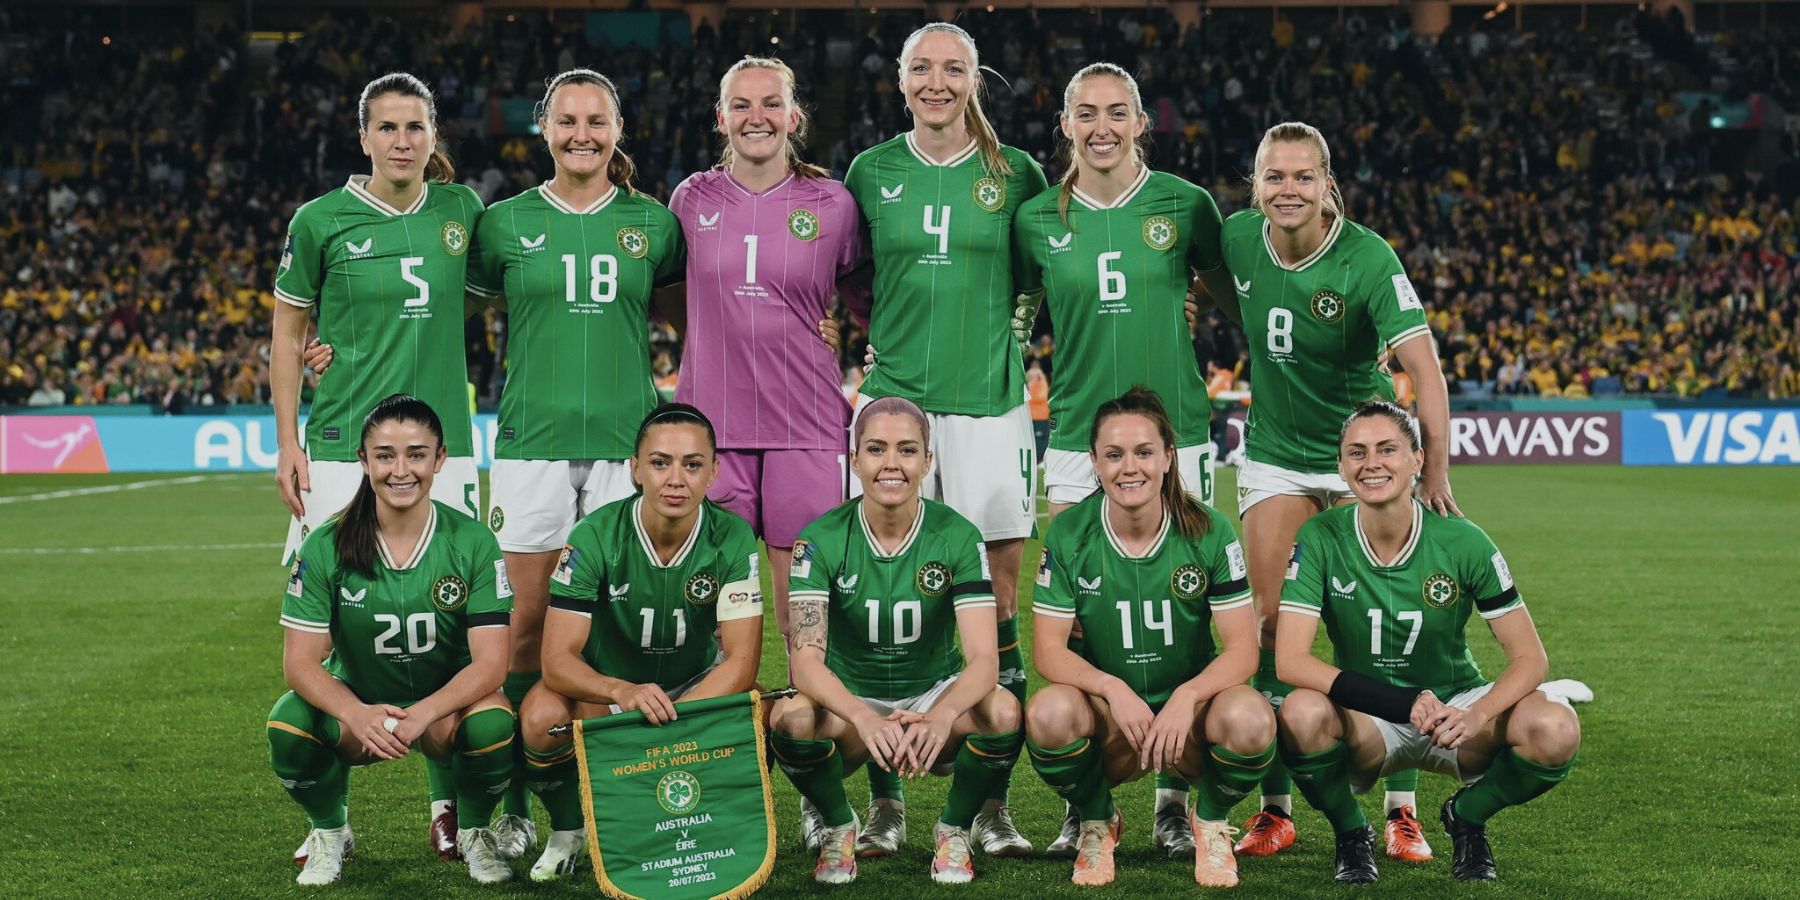 Ireland firmly in the mix in FIFA Women’s World Cup Group B